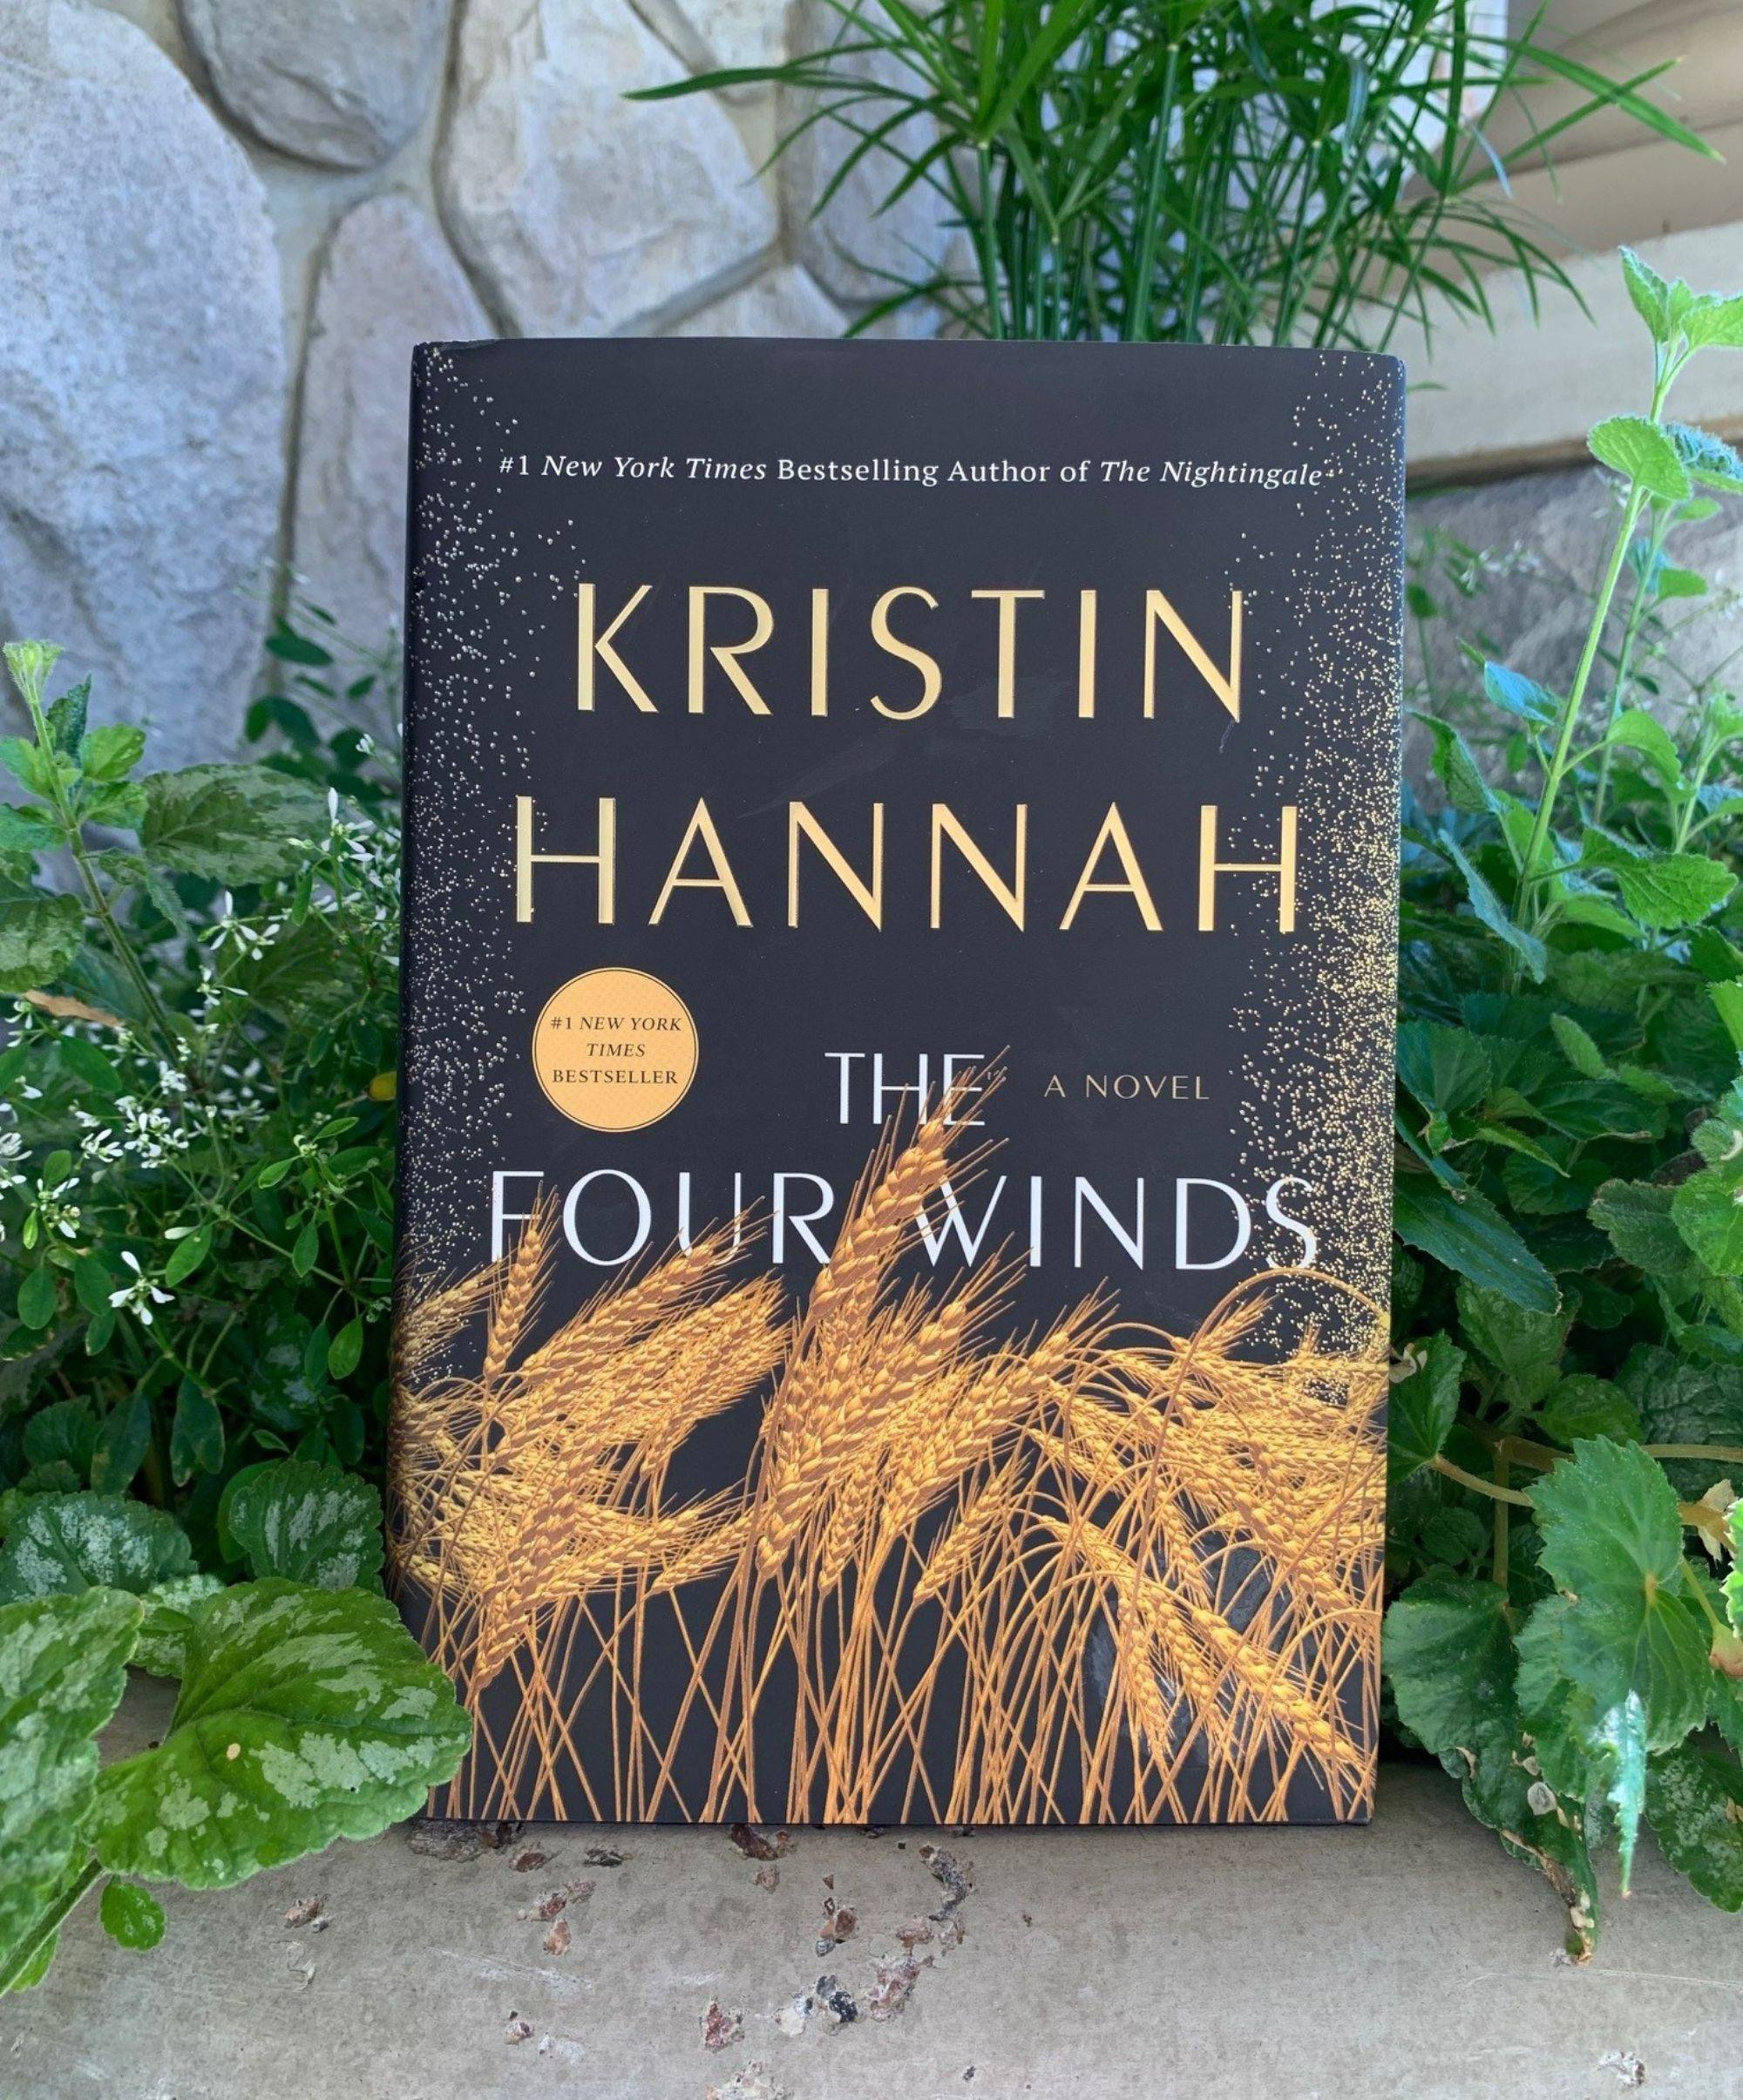 The Four Winds book